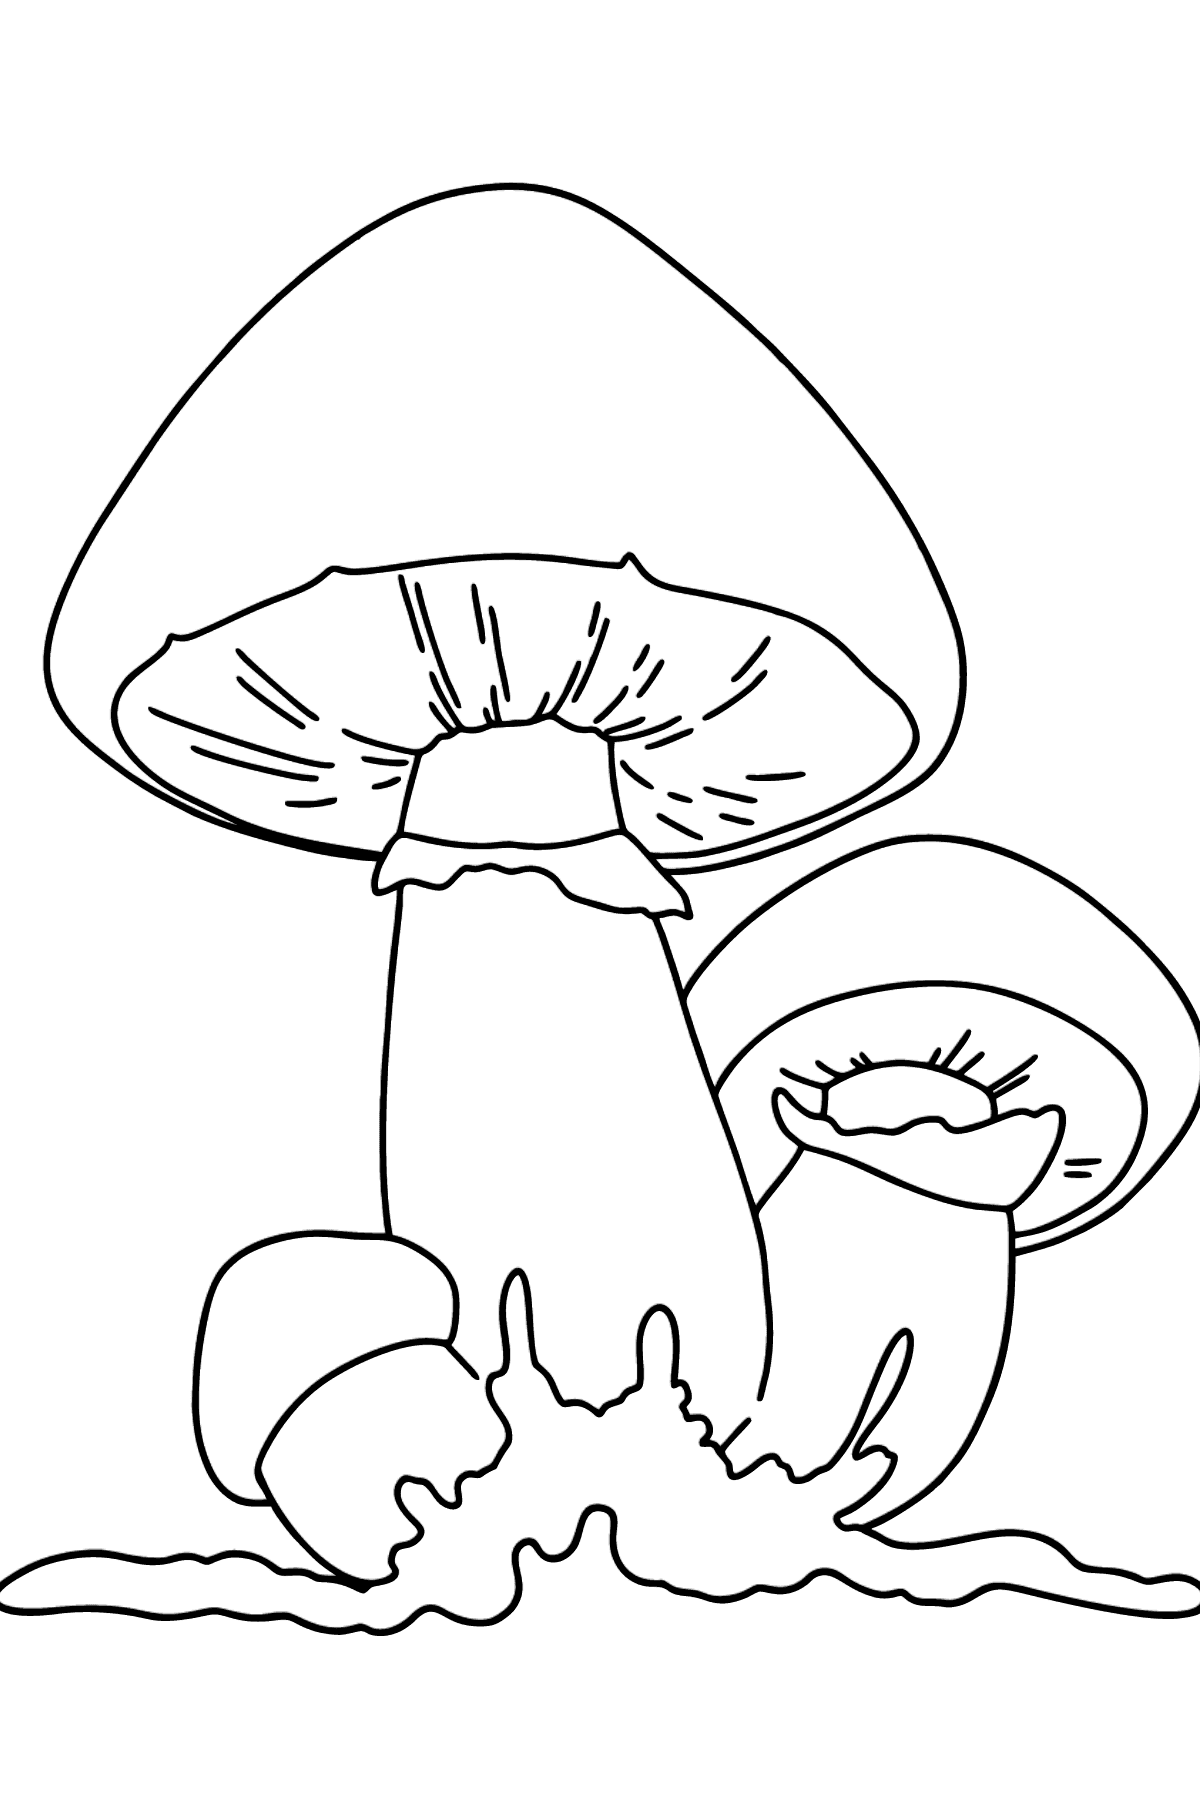 Champignons coloring page ♥ Online or Printable for Free